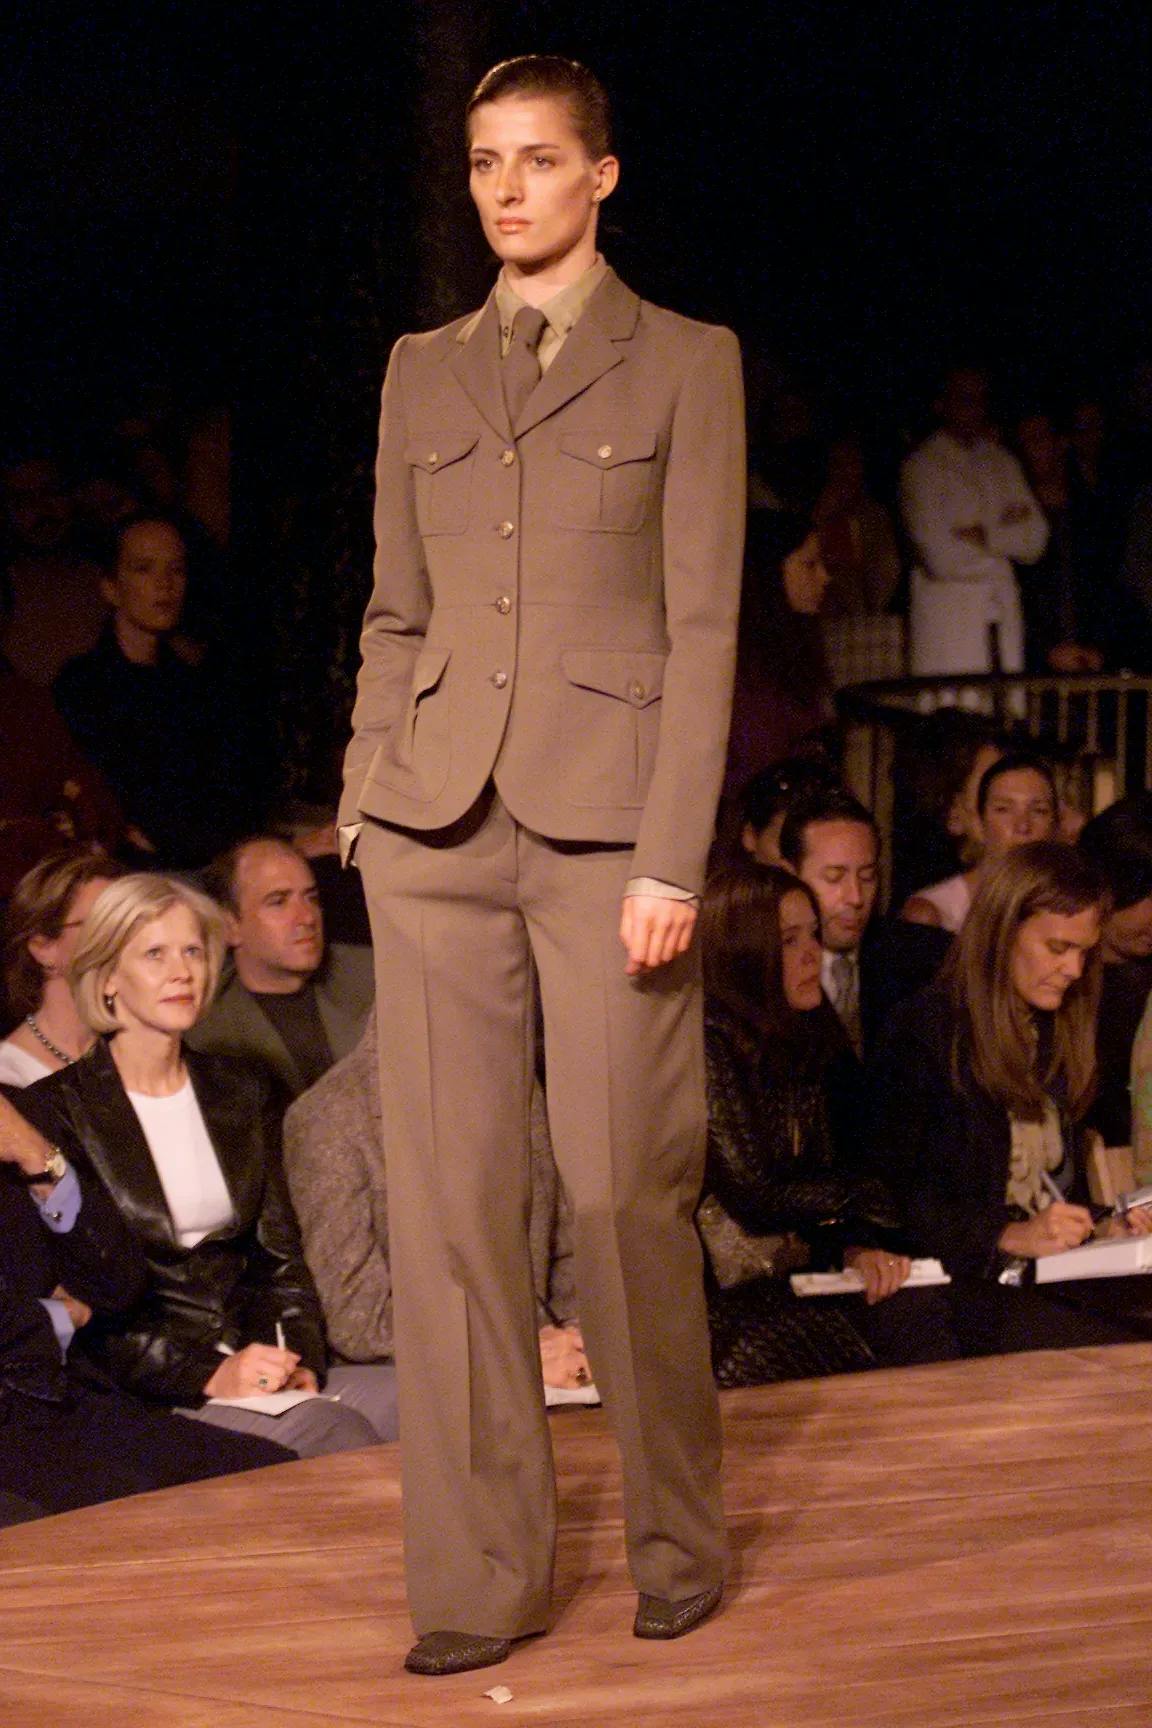 Military uniform style look by Miguel Adrover from the S/S 2001 runway